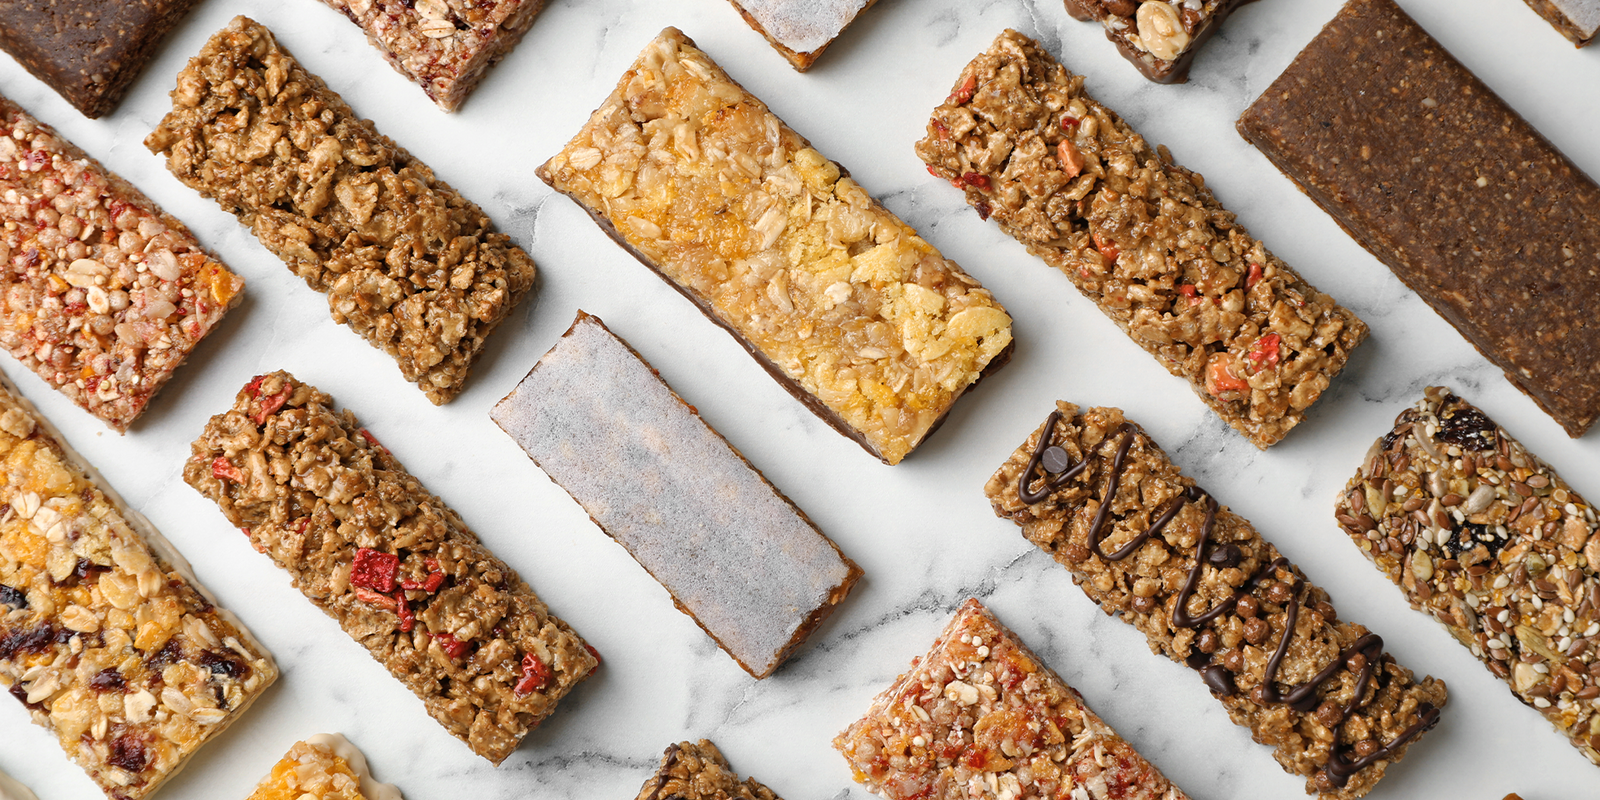 How to make protein bars (and why you should make your own)